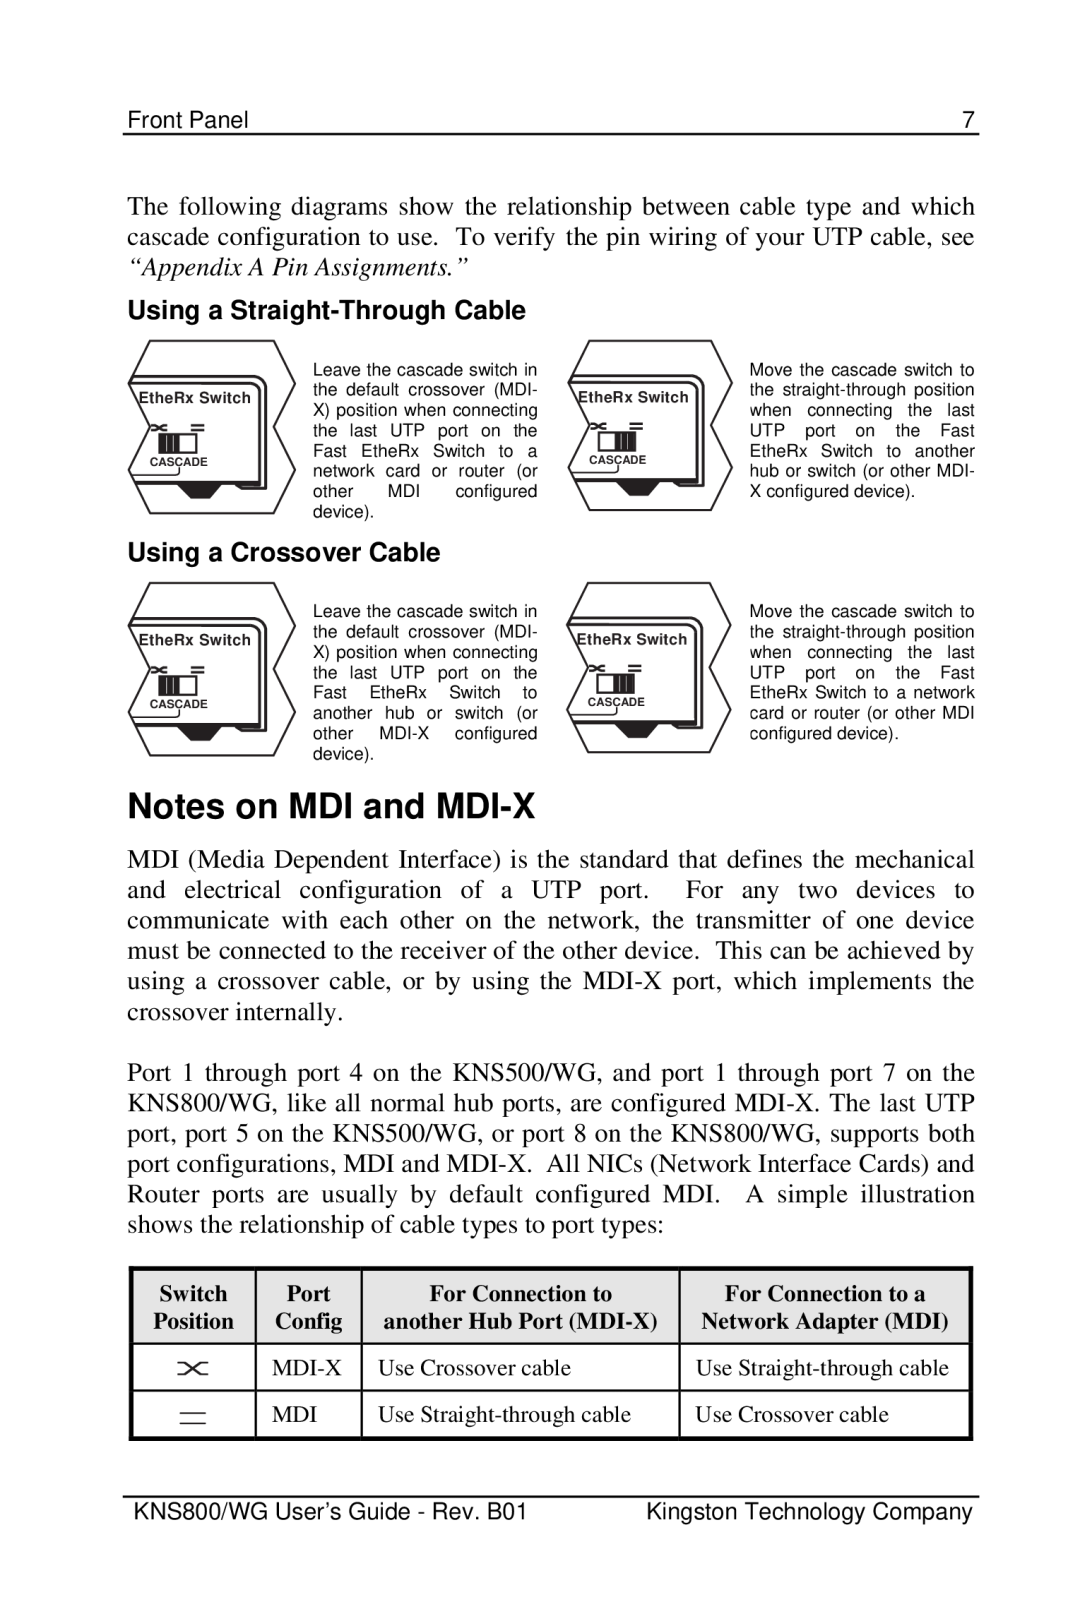 Kingston Technology KNS500/WG, KNS800/WG Notes on MDI and MDI-X, Using a Straight-Through Cable, Using a Crossover Cable 